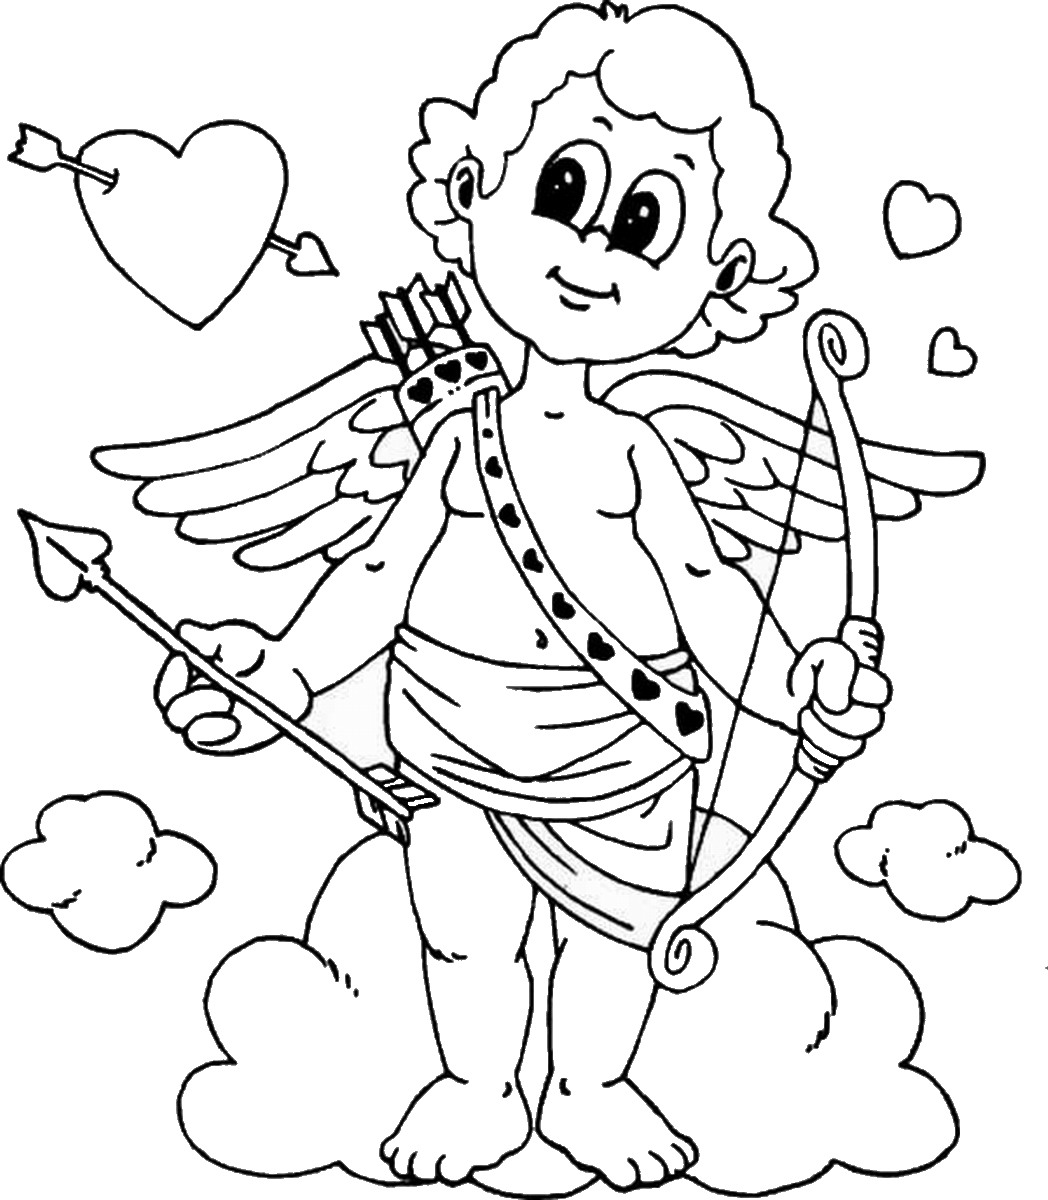 valentine-s-day-coloring-pages